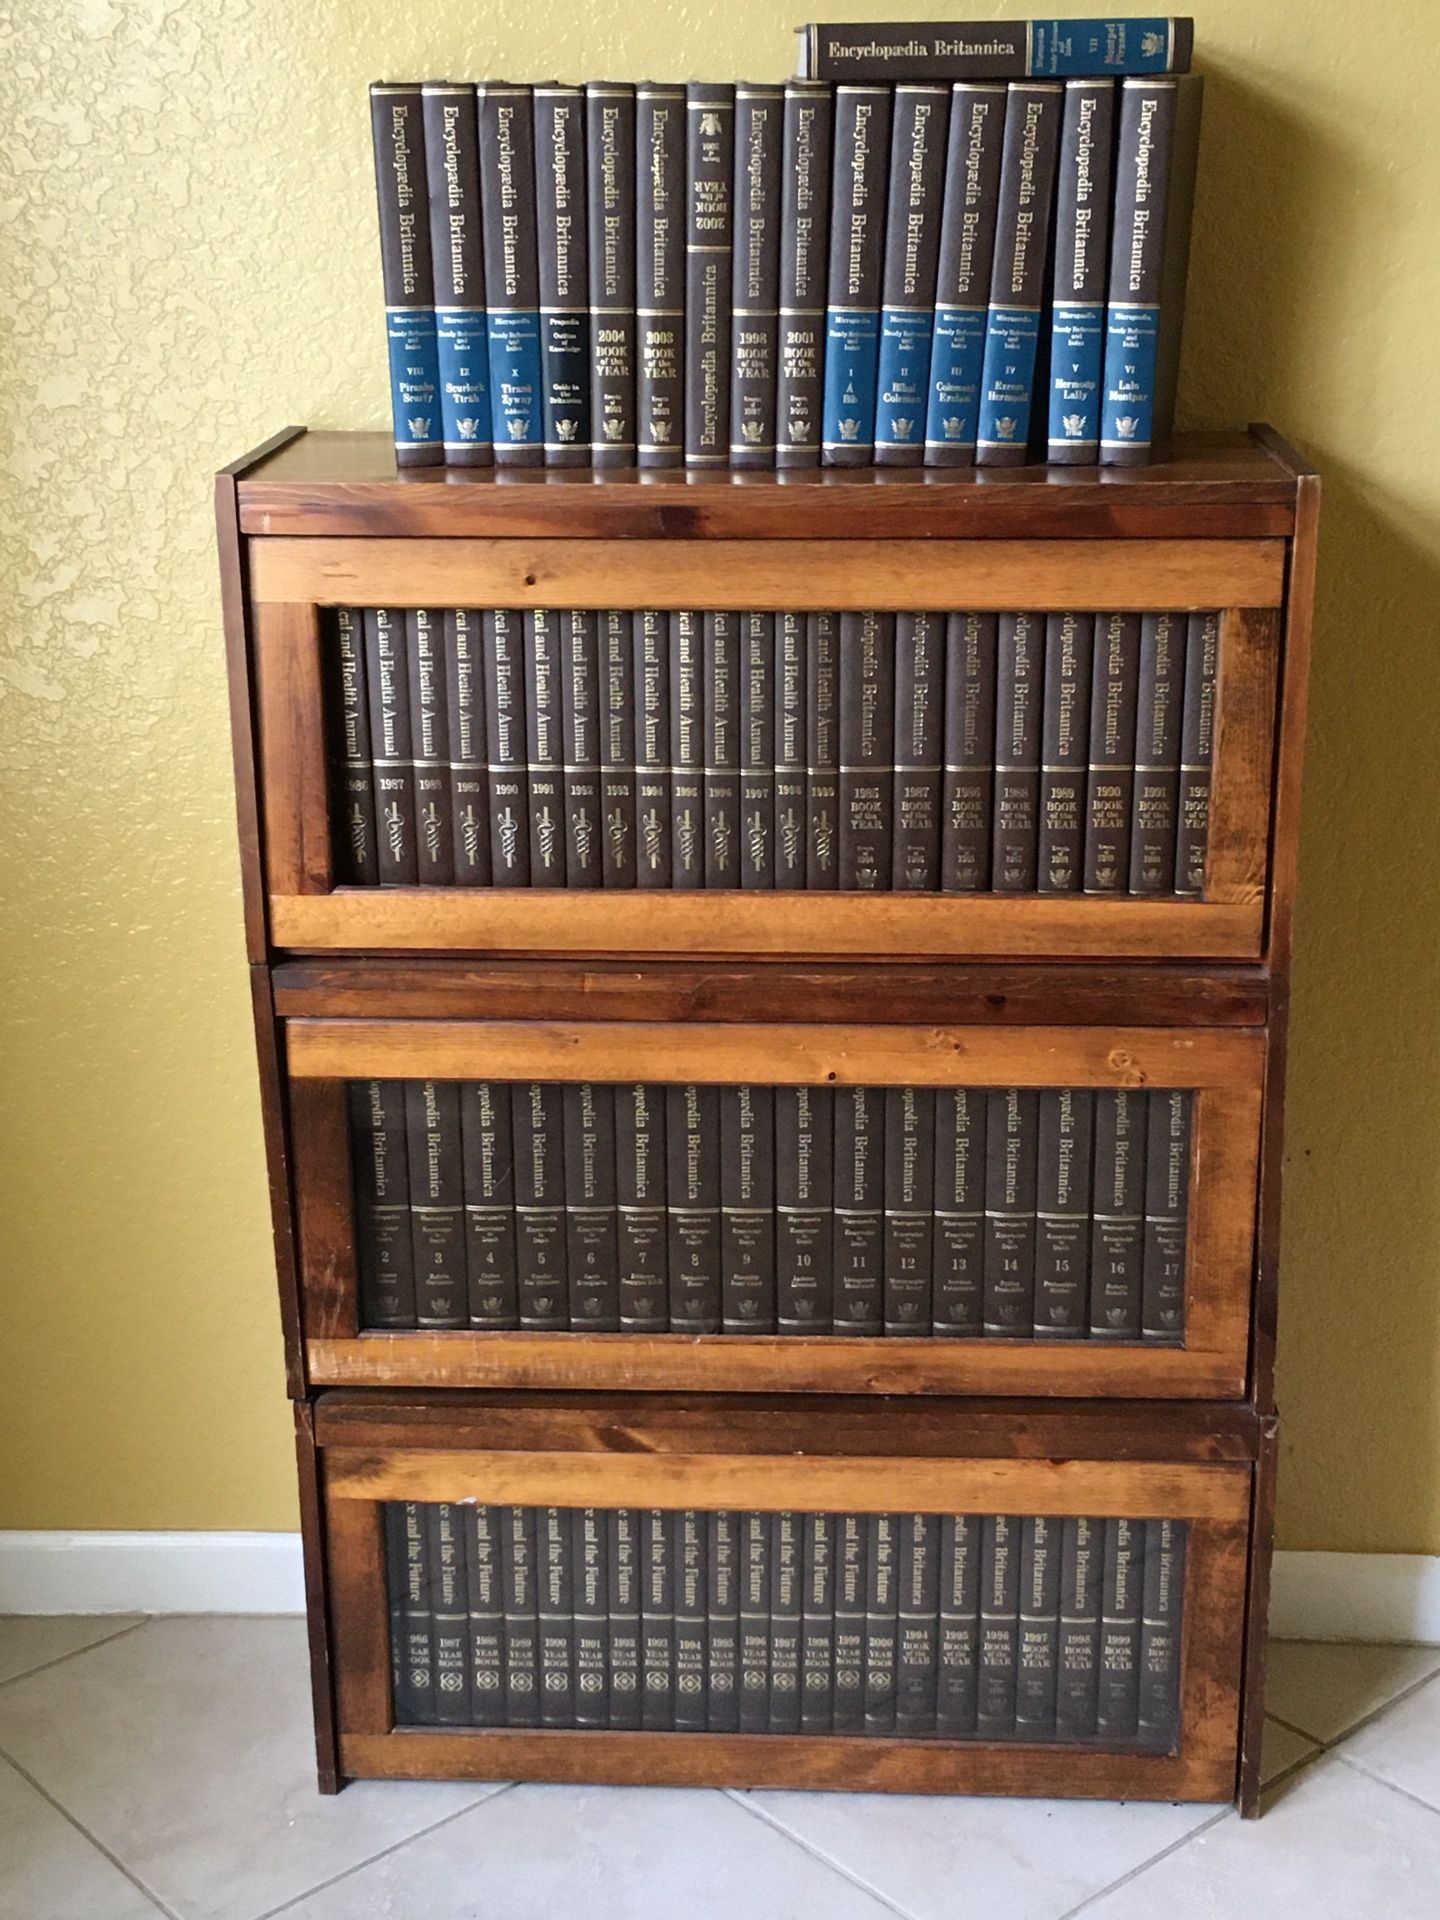 Encyclopedia Britannica for FREE. Pick up today!